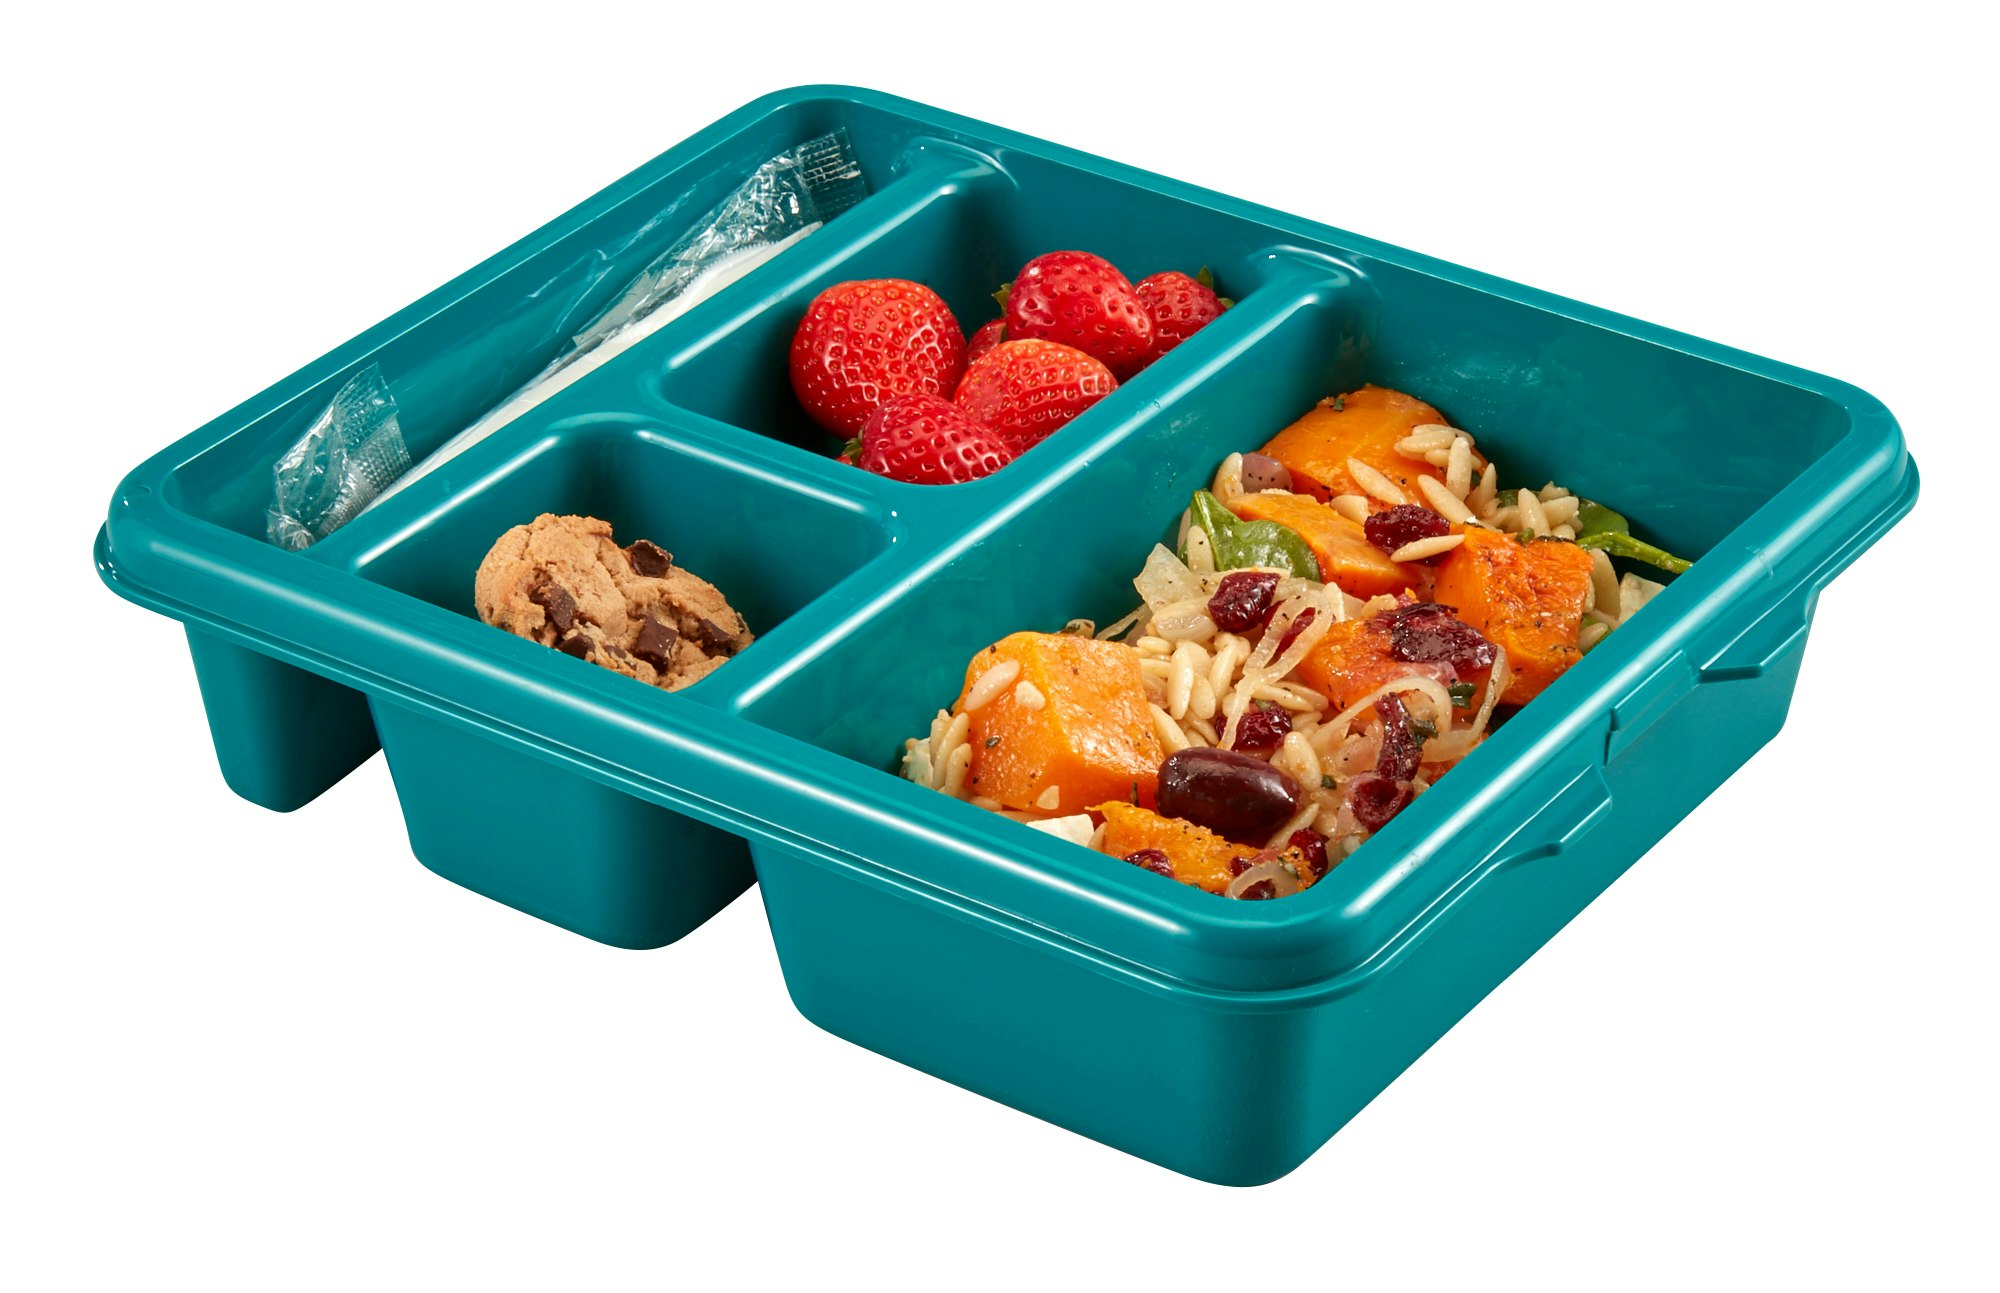 Cook's Gator 4-Compartment Insulated Meal Tray